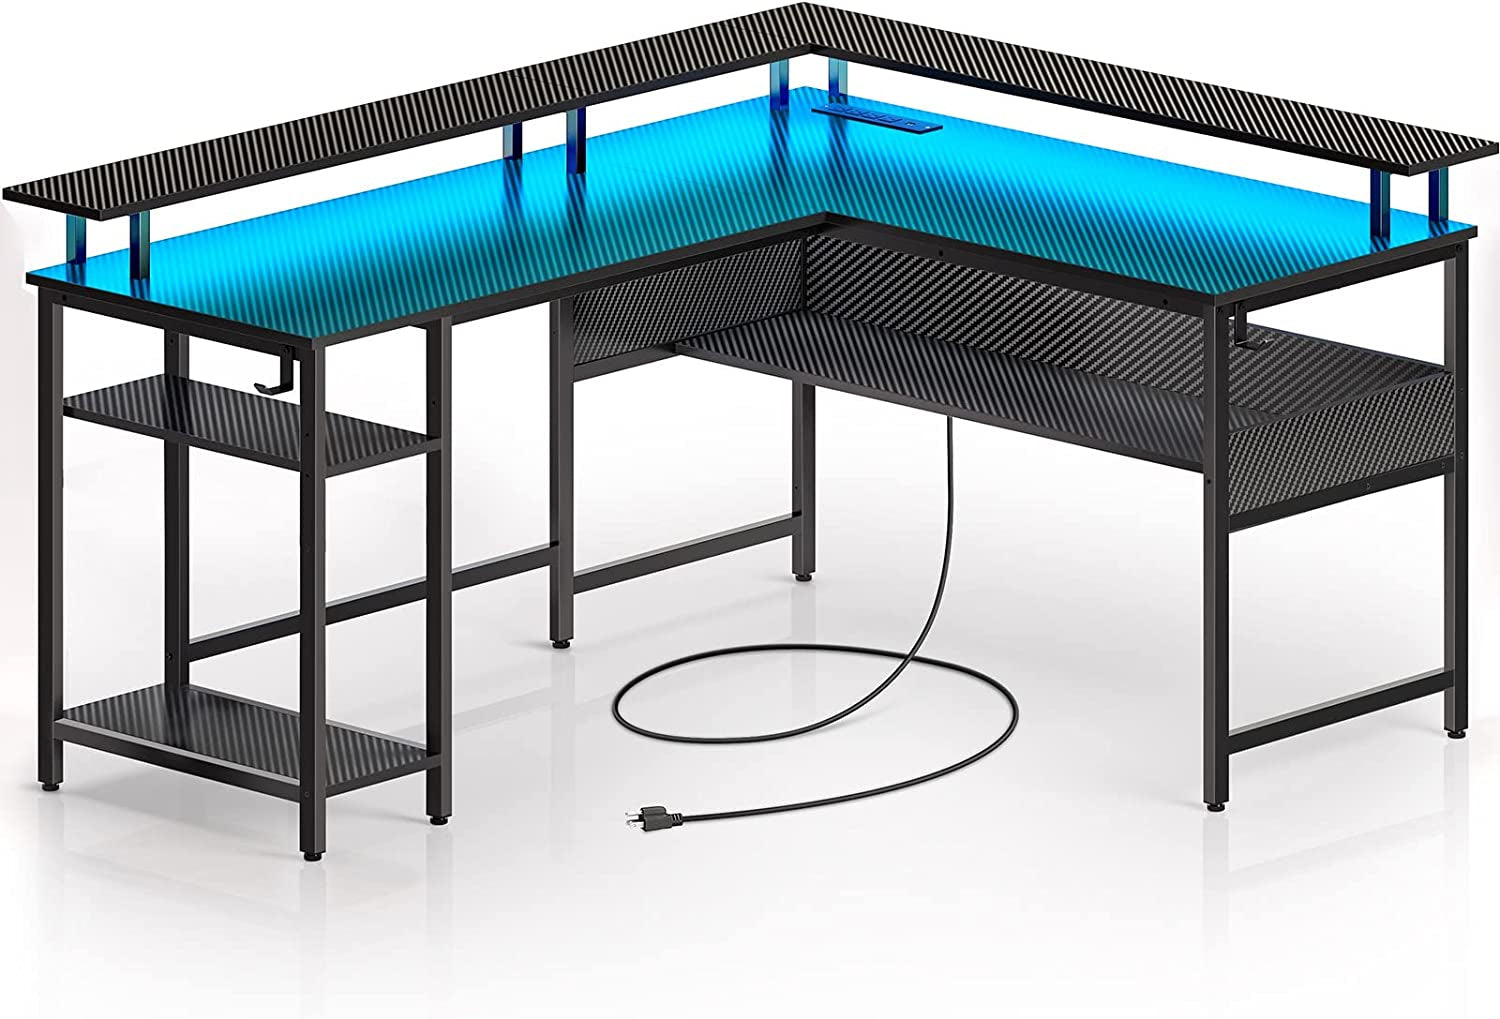 Carbon Fiber Computer Desk with LED Lights, Power Outlets, and Storage - Reversible L Shaped Gaming Desk with Monitor Stand, USB Port, and Hook